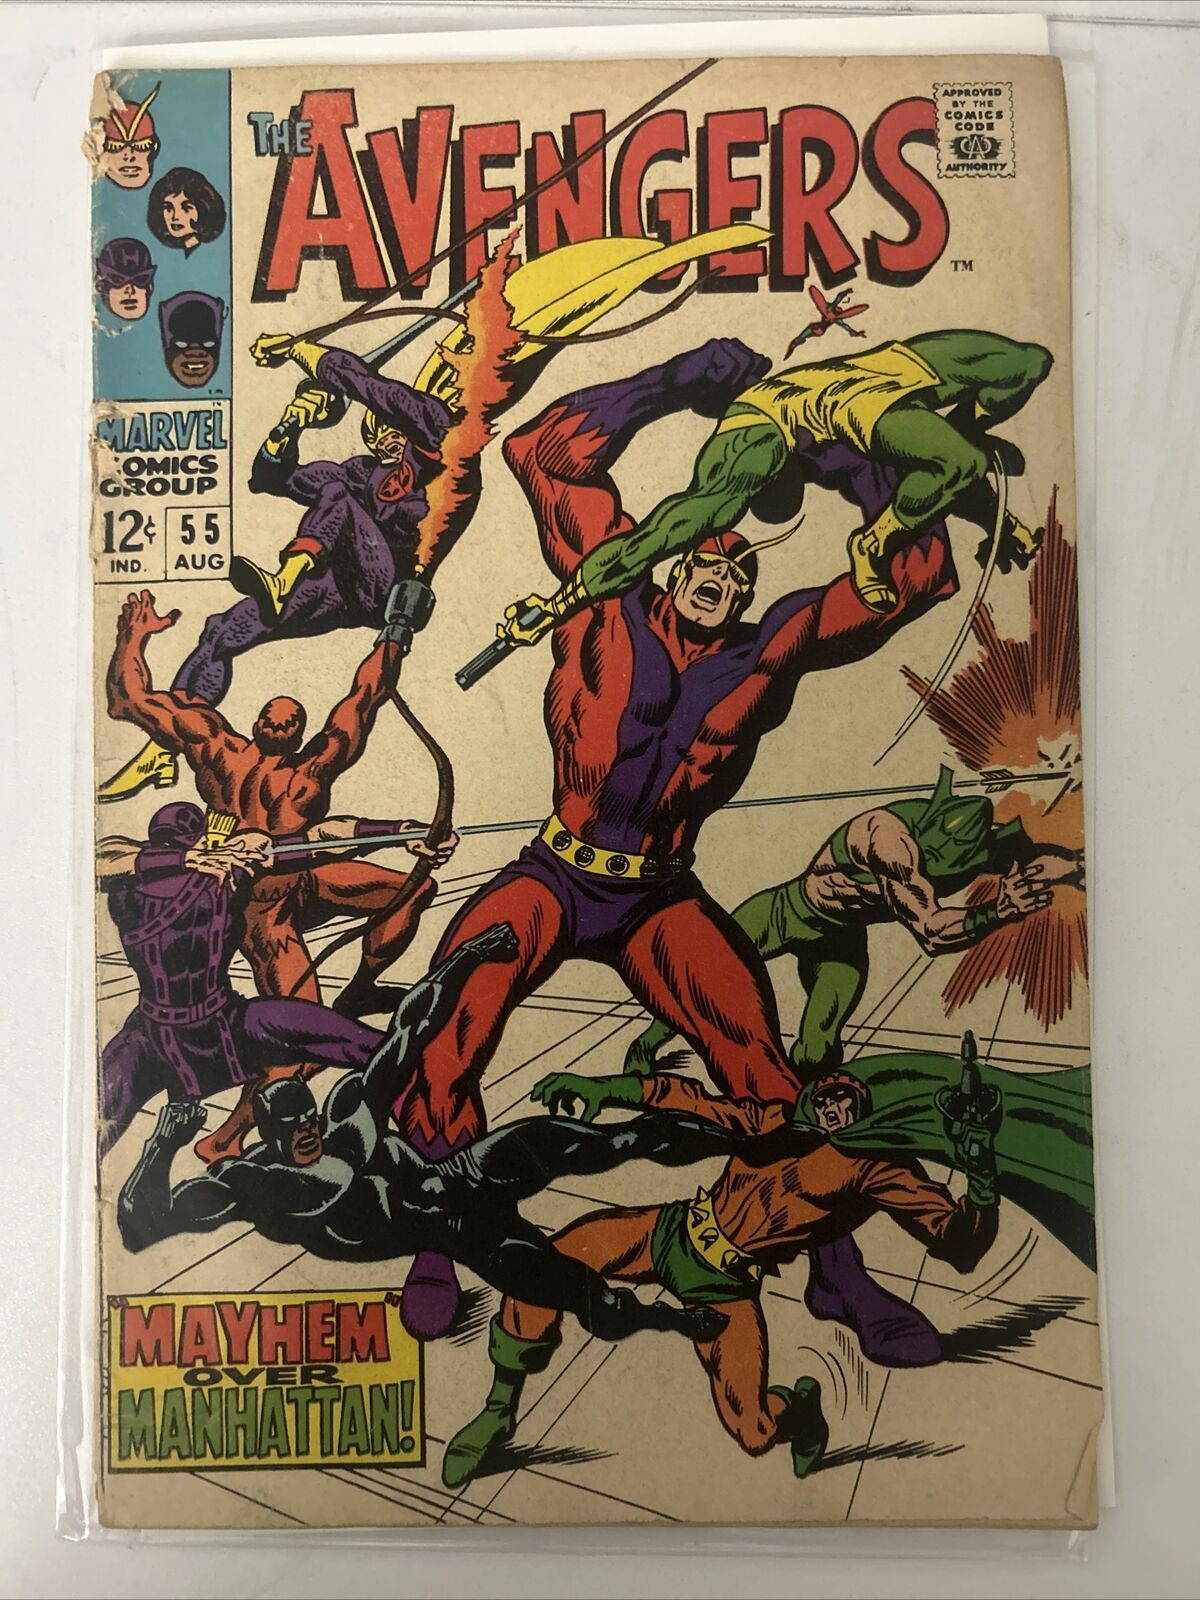 The Avengers #55 (Marvel 1968) 1st Full Appearance of Ultron - Silver Age Key